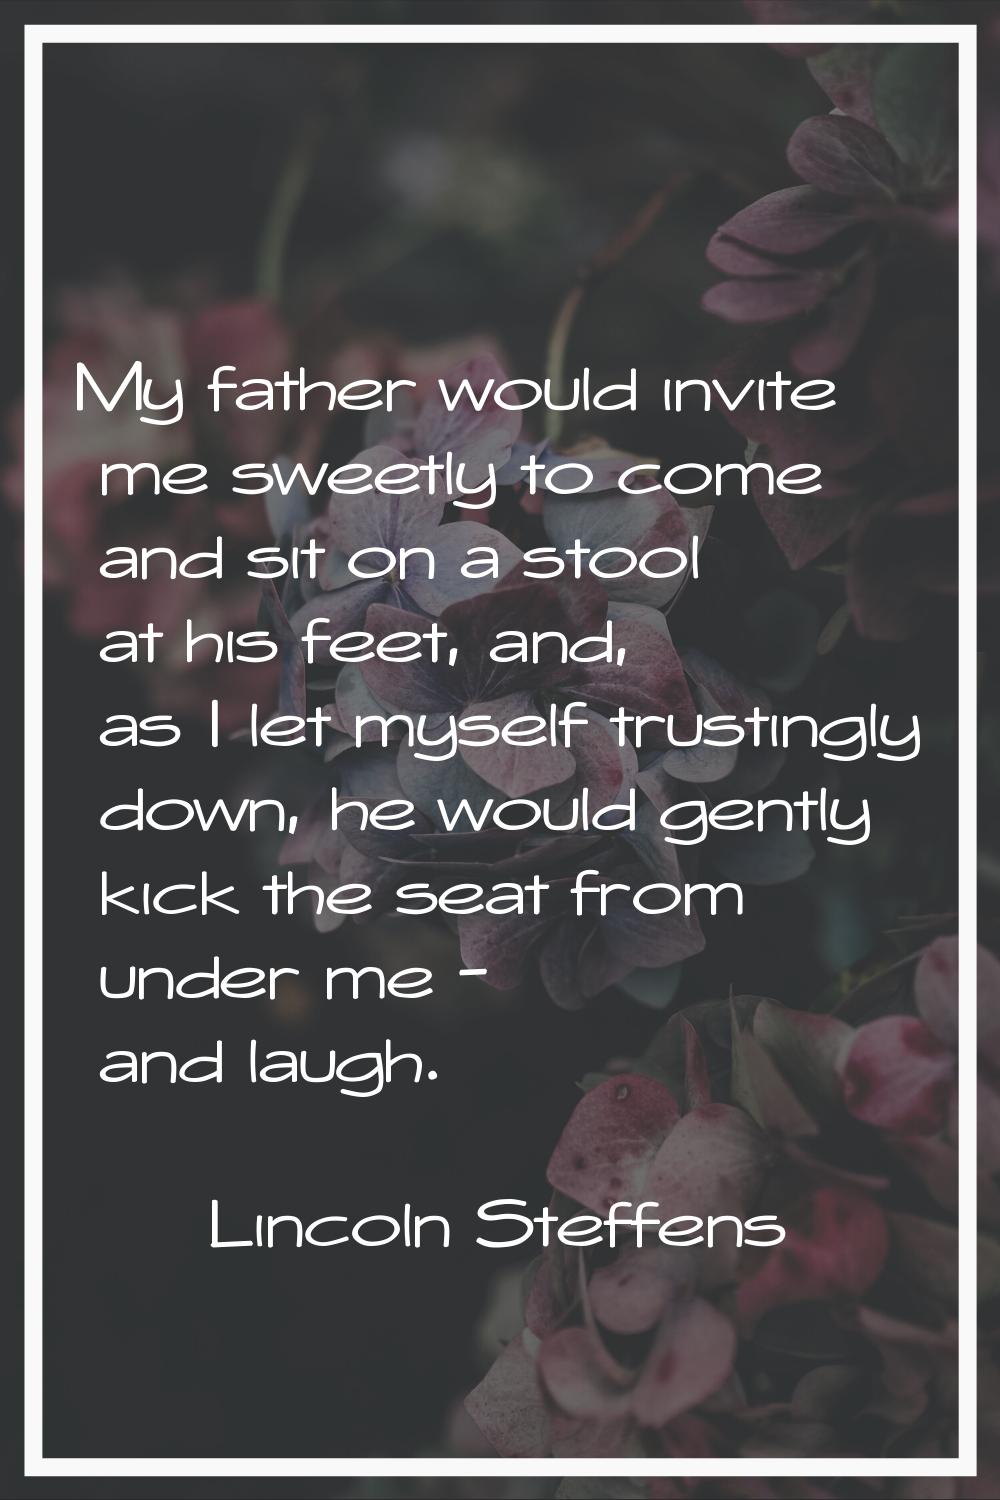 My father would invite me sweetly to come and sit on a stool at his feet, and, as I let myself trus